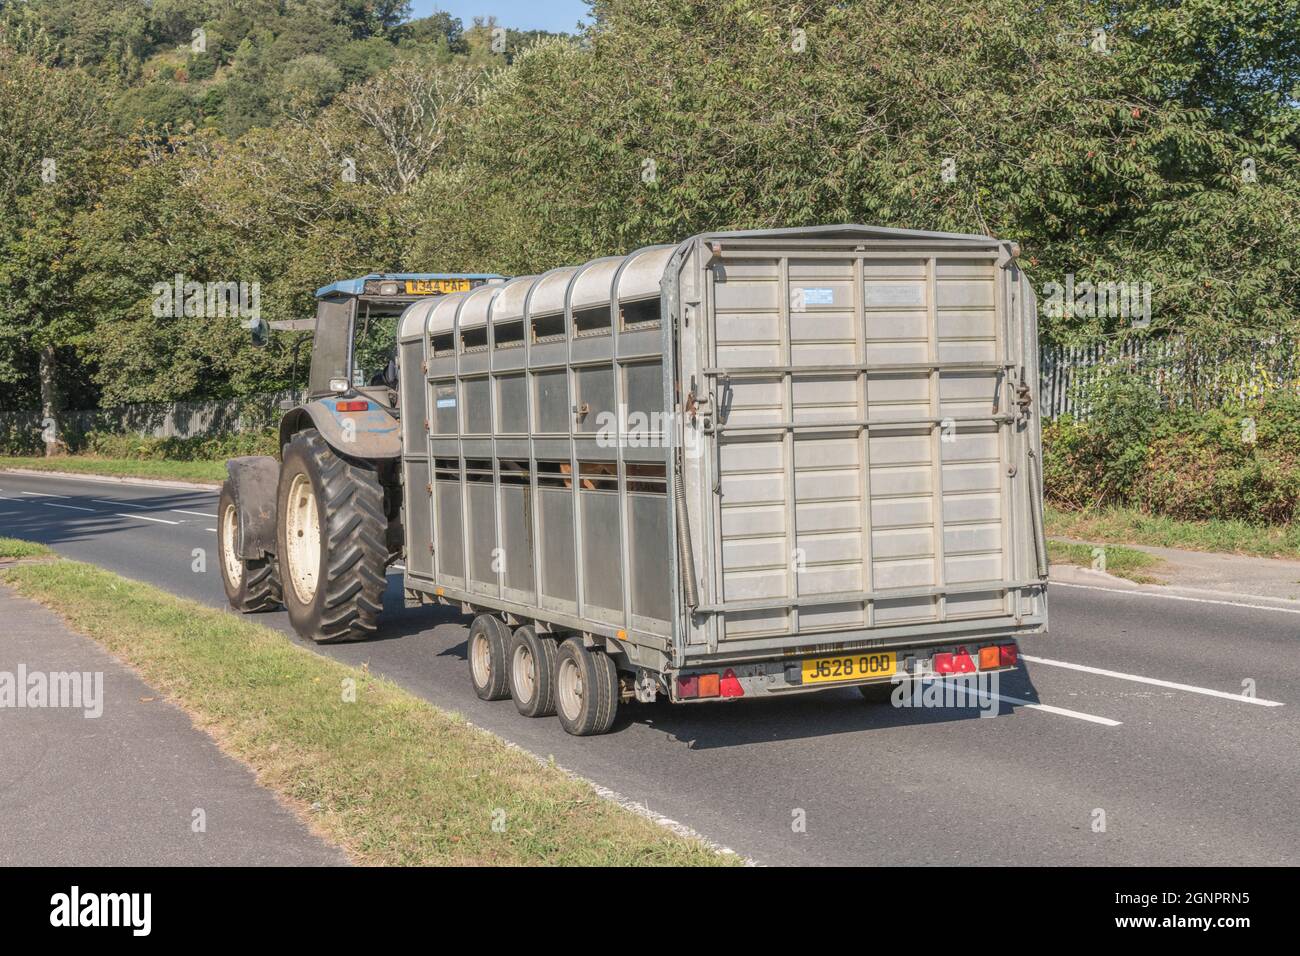 Blue New Holland farm tractor on open country rural road, pulling cattle / livestock trailer downhill. Model is New Holland TM125. Stock Photo